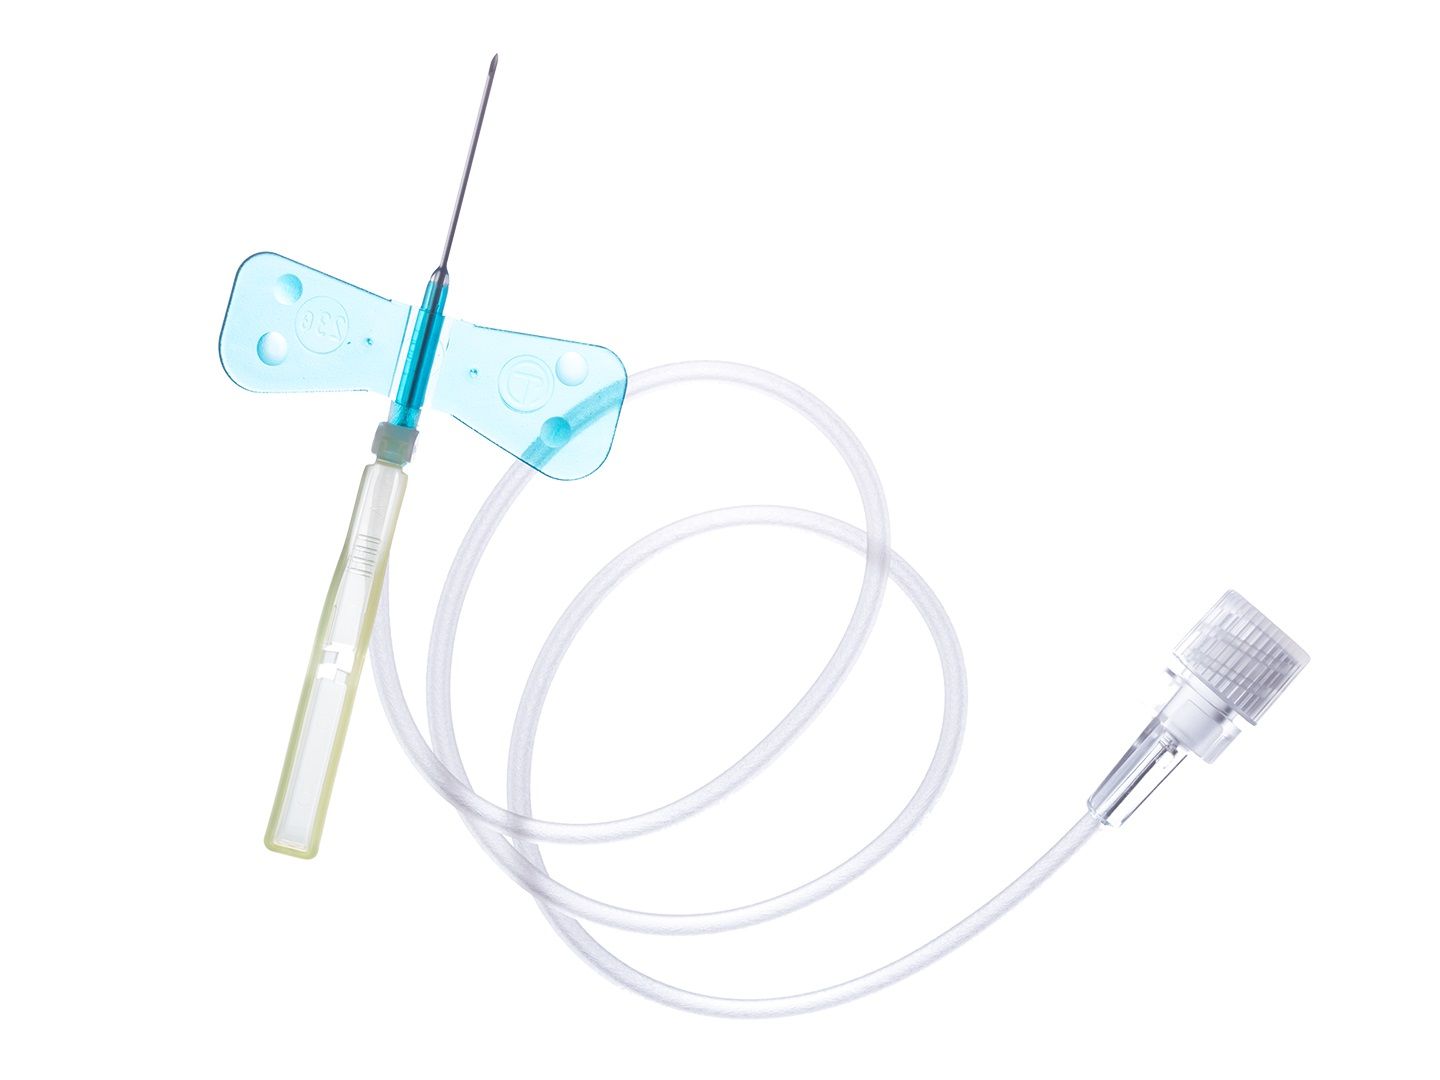 TERUMO SURFLO® WINGED INFUSION SETS SCALPVEIN SETS (BUTTERFLY NEEDLES) / LONG TUBE  photo